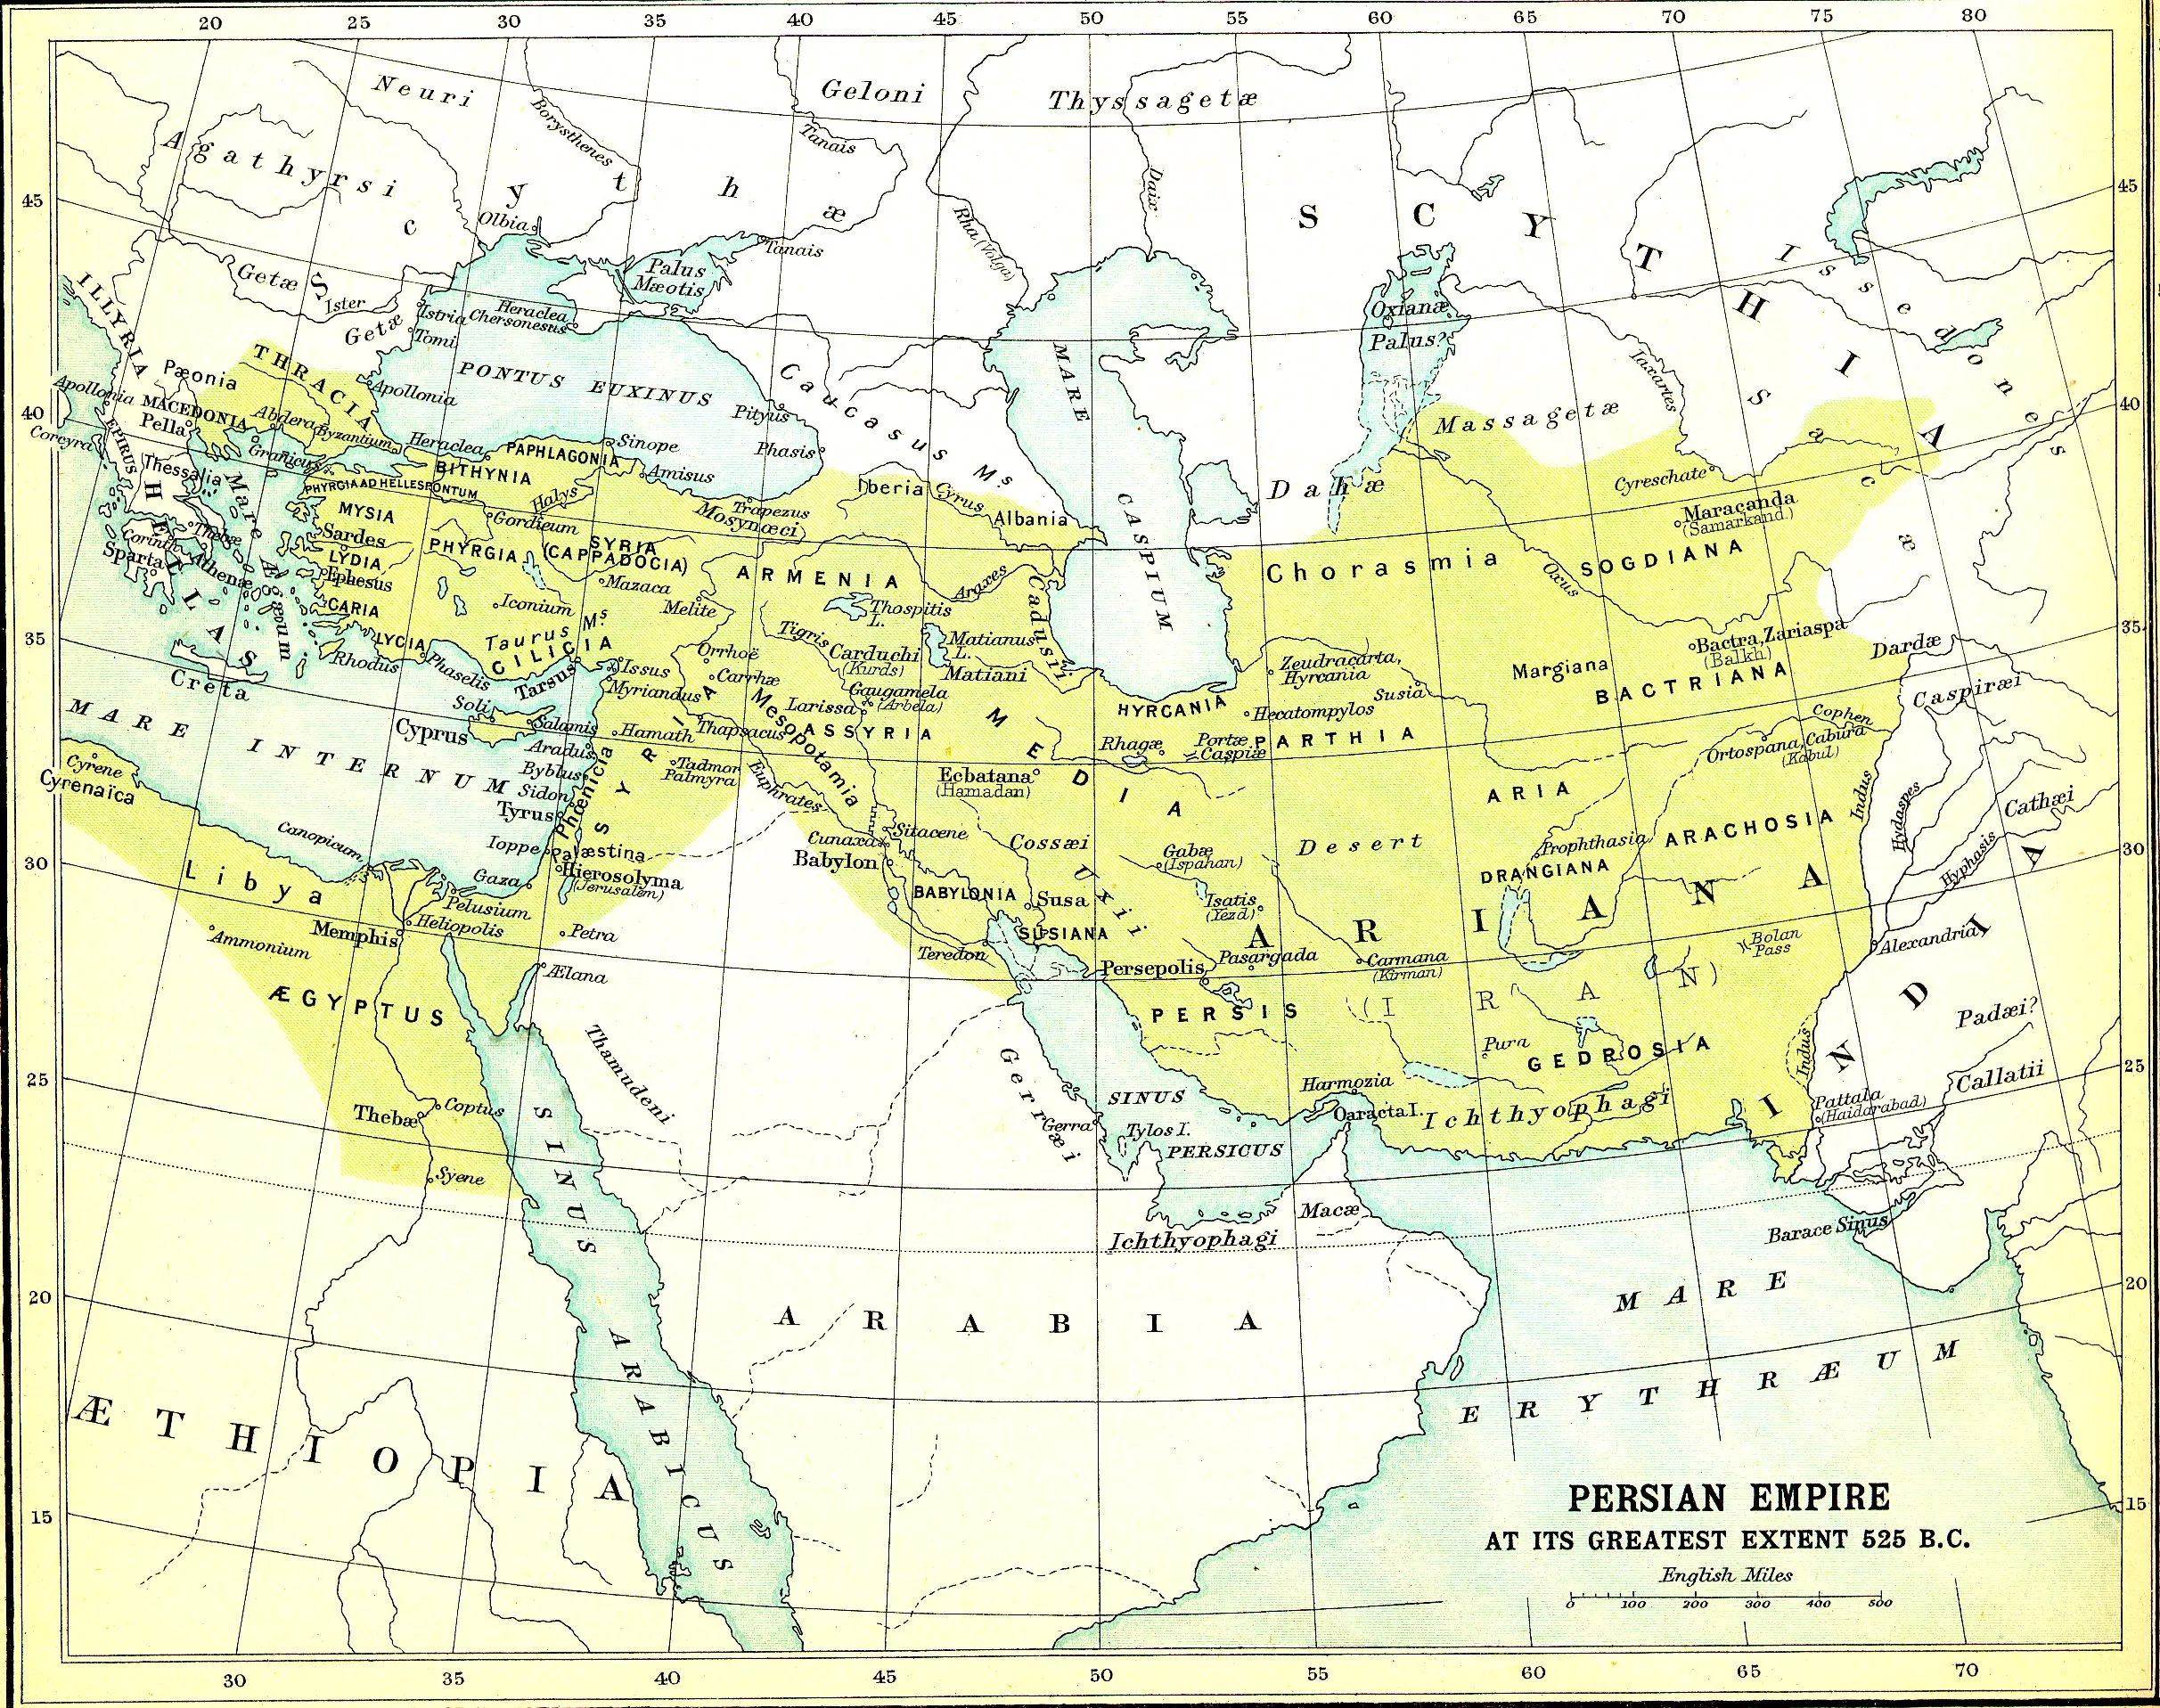 The history of the persian empire